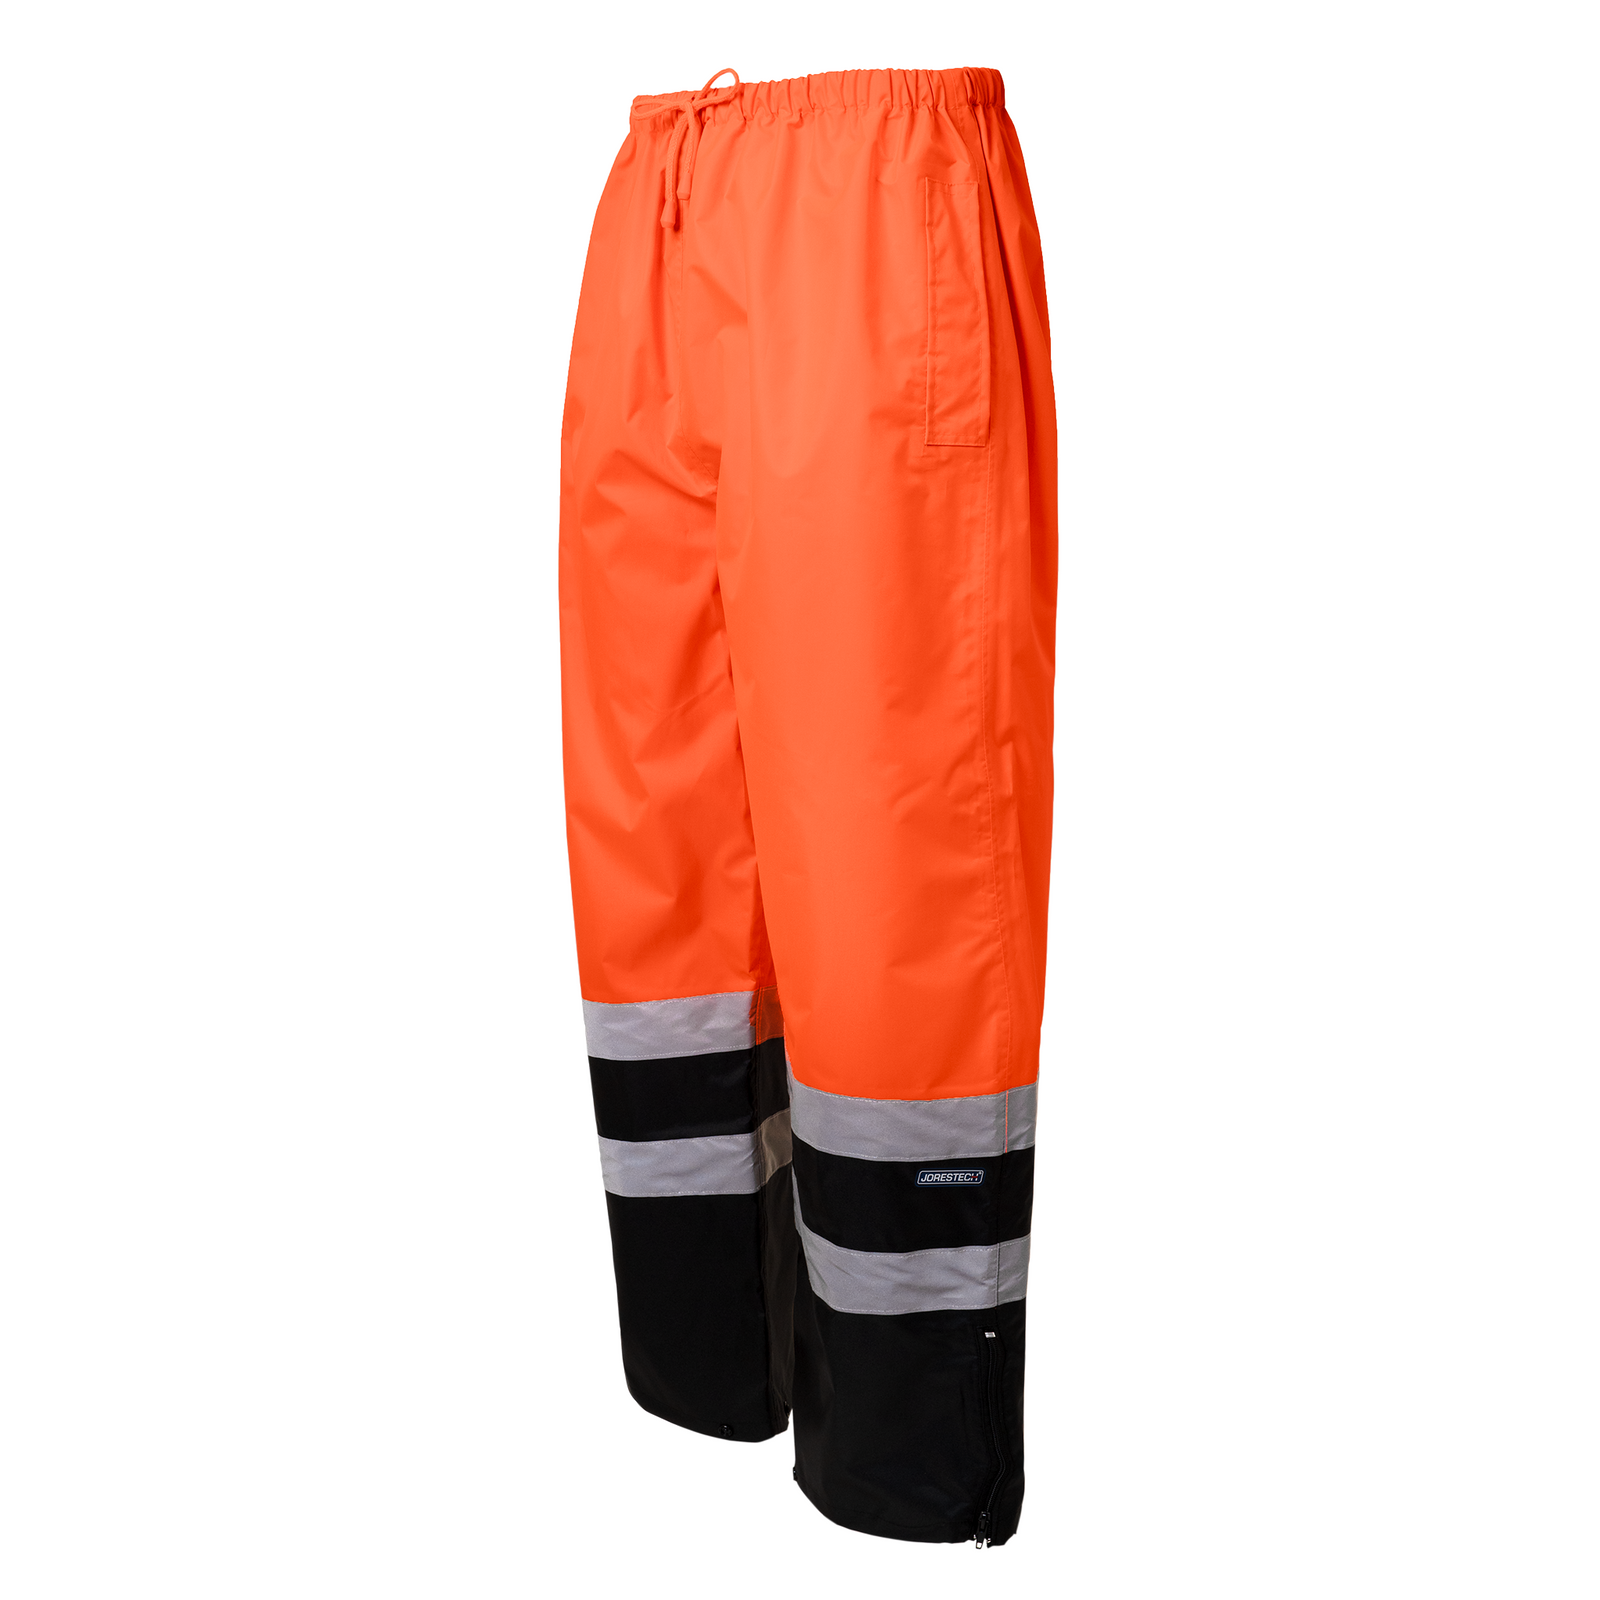 Diagonal view of the black and orange high visibility JORESTECH rain pant with reflective strips